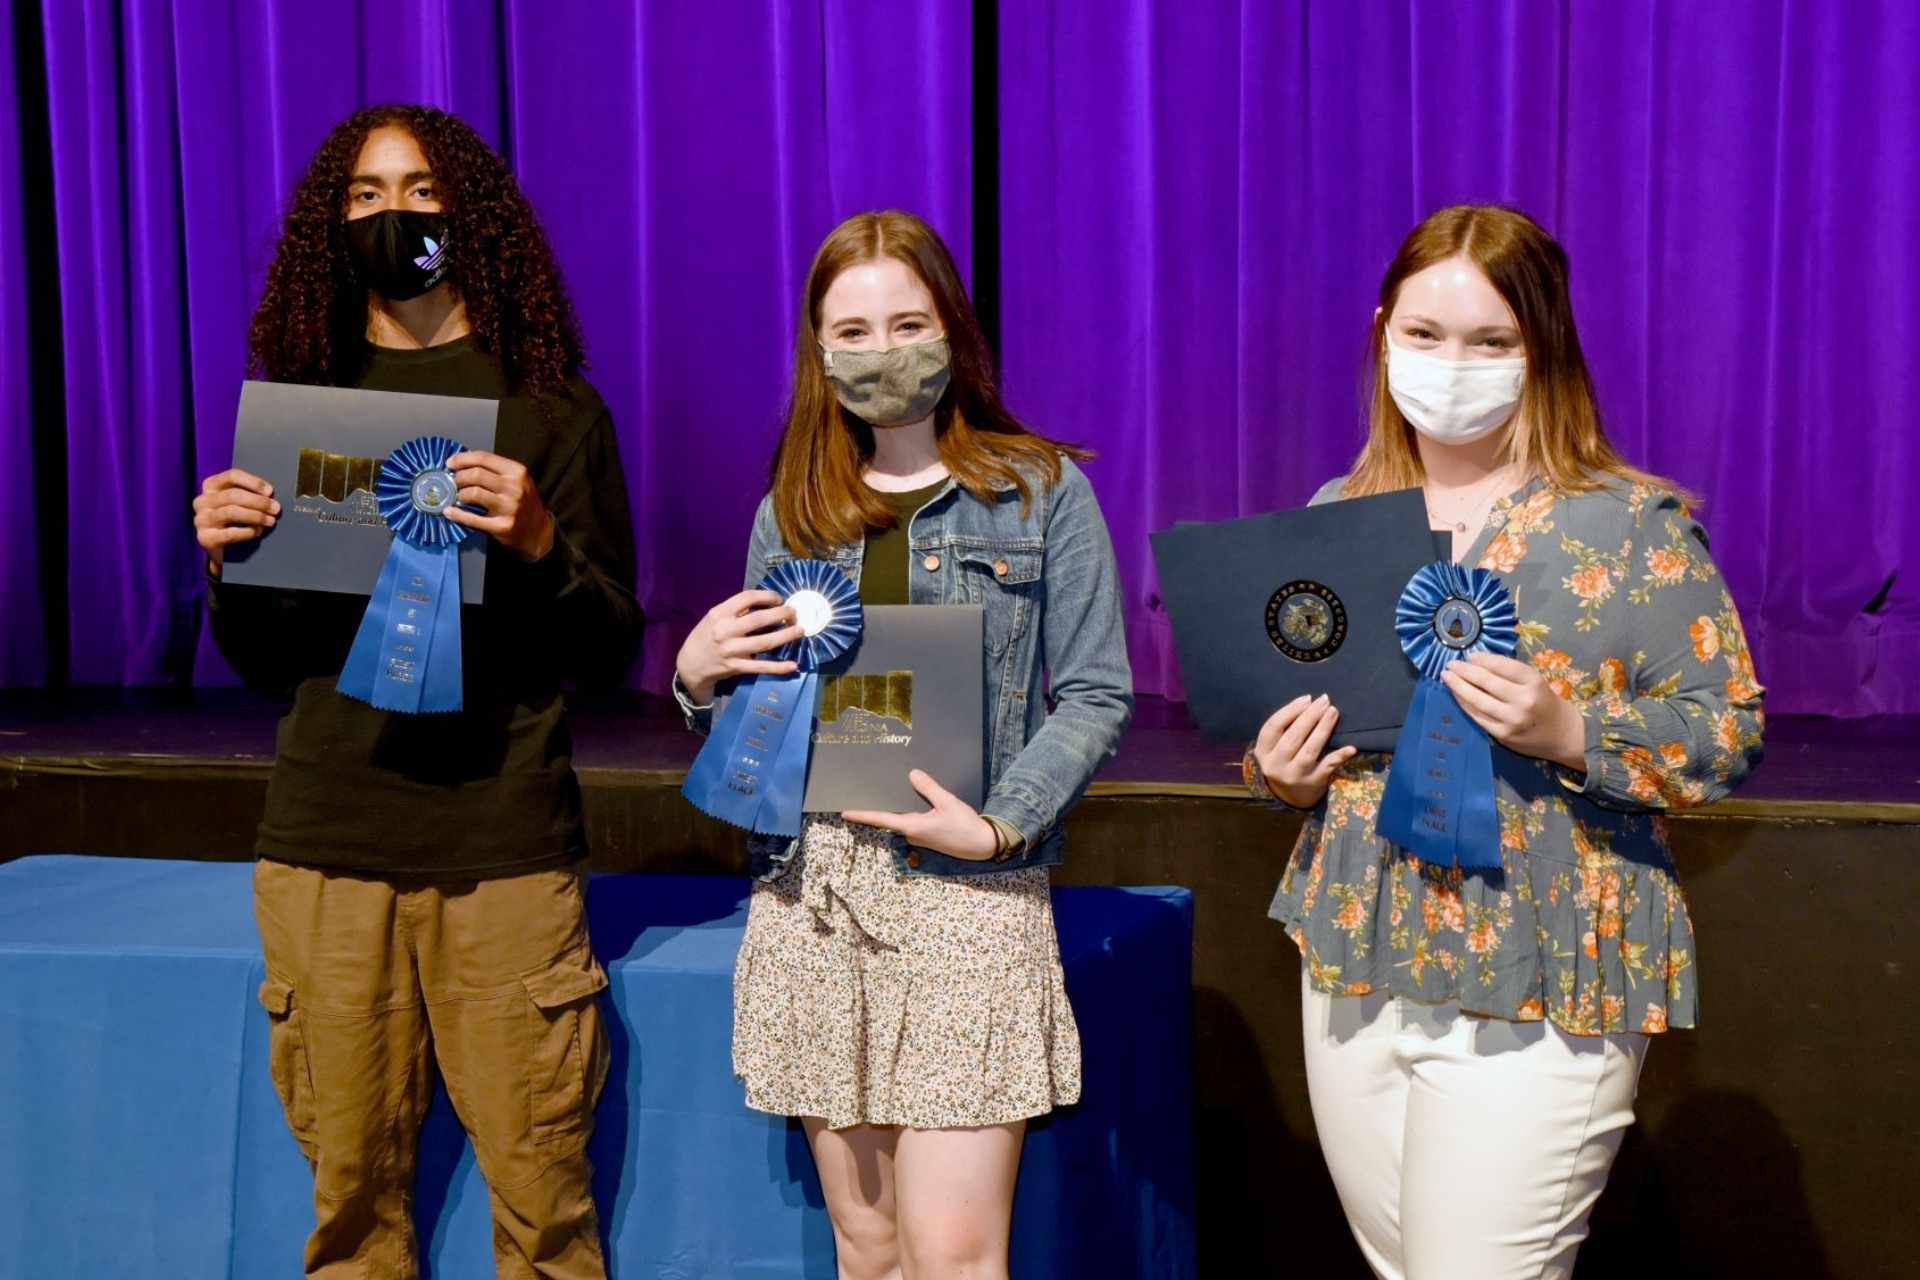 2021 Youth Congressional Art First-Place Award winners (L to R): Bryce Johnson, Robert C. Byrd High School; Emma Carpenter, George Washington High School; and Gracie Hines, Webster County High School.